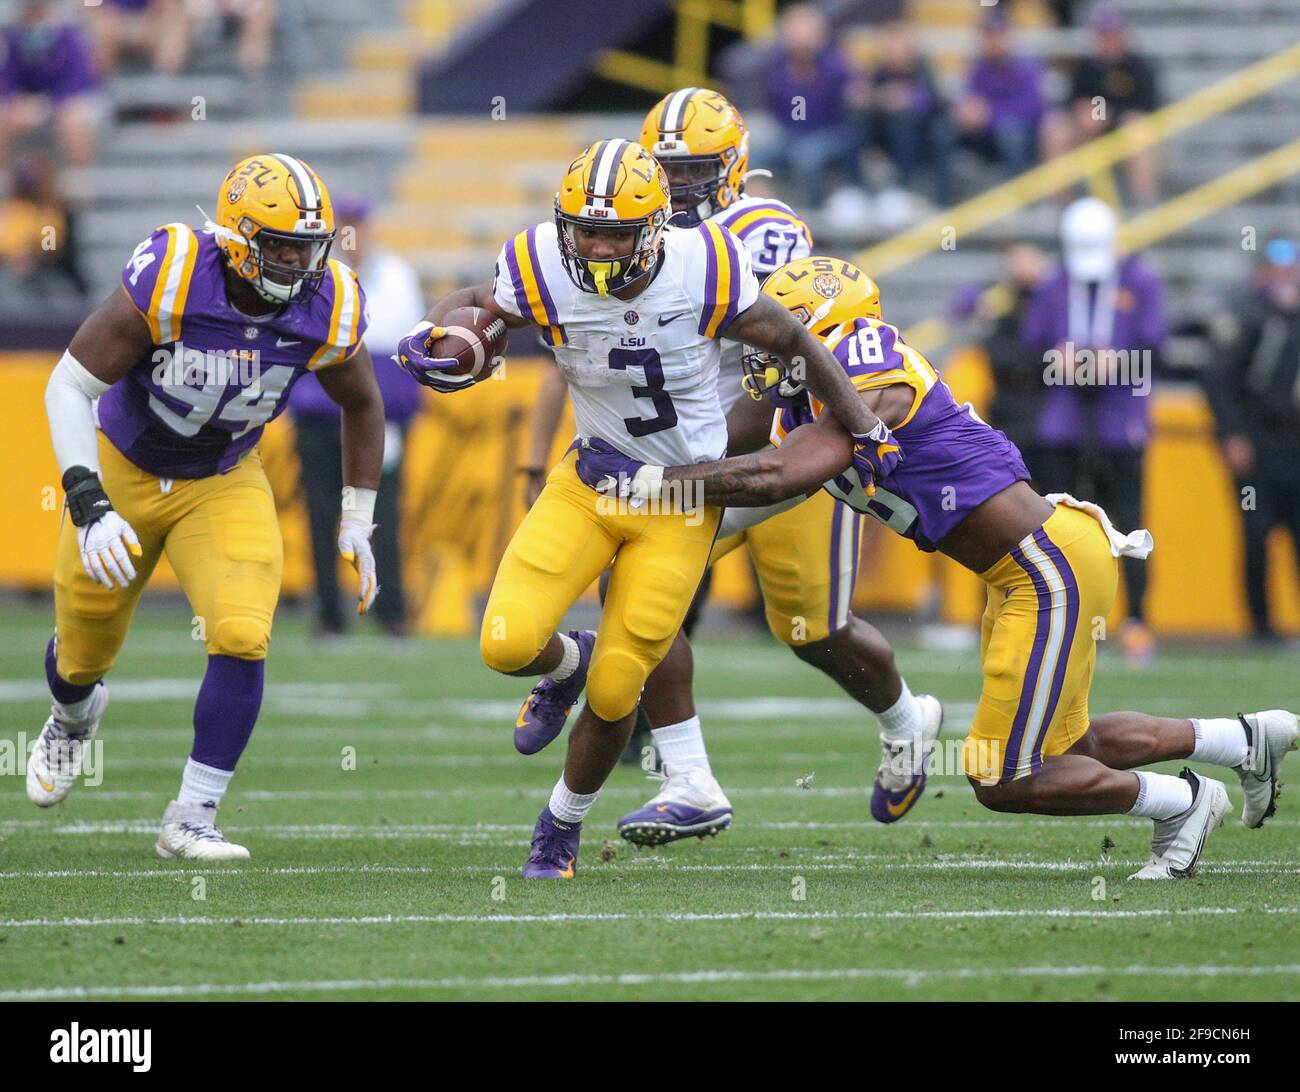 Baton Rouge, LA, USA. 17th Apr, 2021. LSU's Tyrion Davis-Price (3) looks for running room as linebacker Damone Clark (18) and Joseph Evans (94) look for a tackle during the National L Club LSU Spring Game at Tiger Stadium in Baton Rouge, LA. Jonathan Mailhes/CSM/Alamy Live News Stock Photo